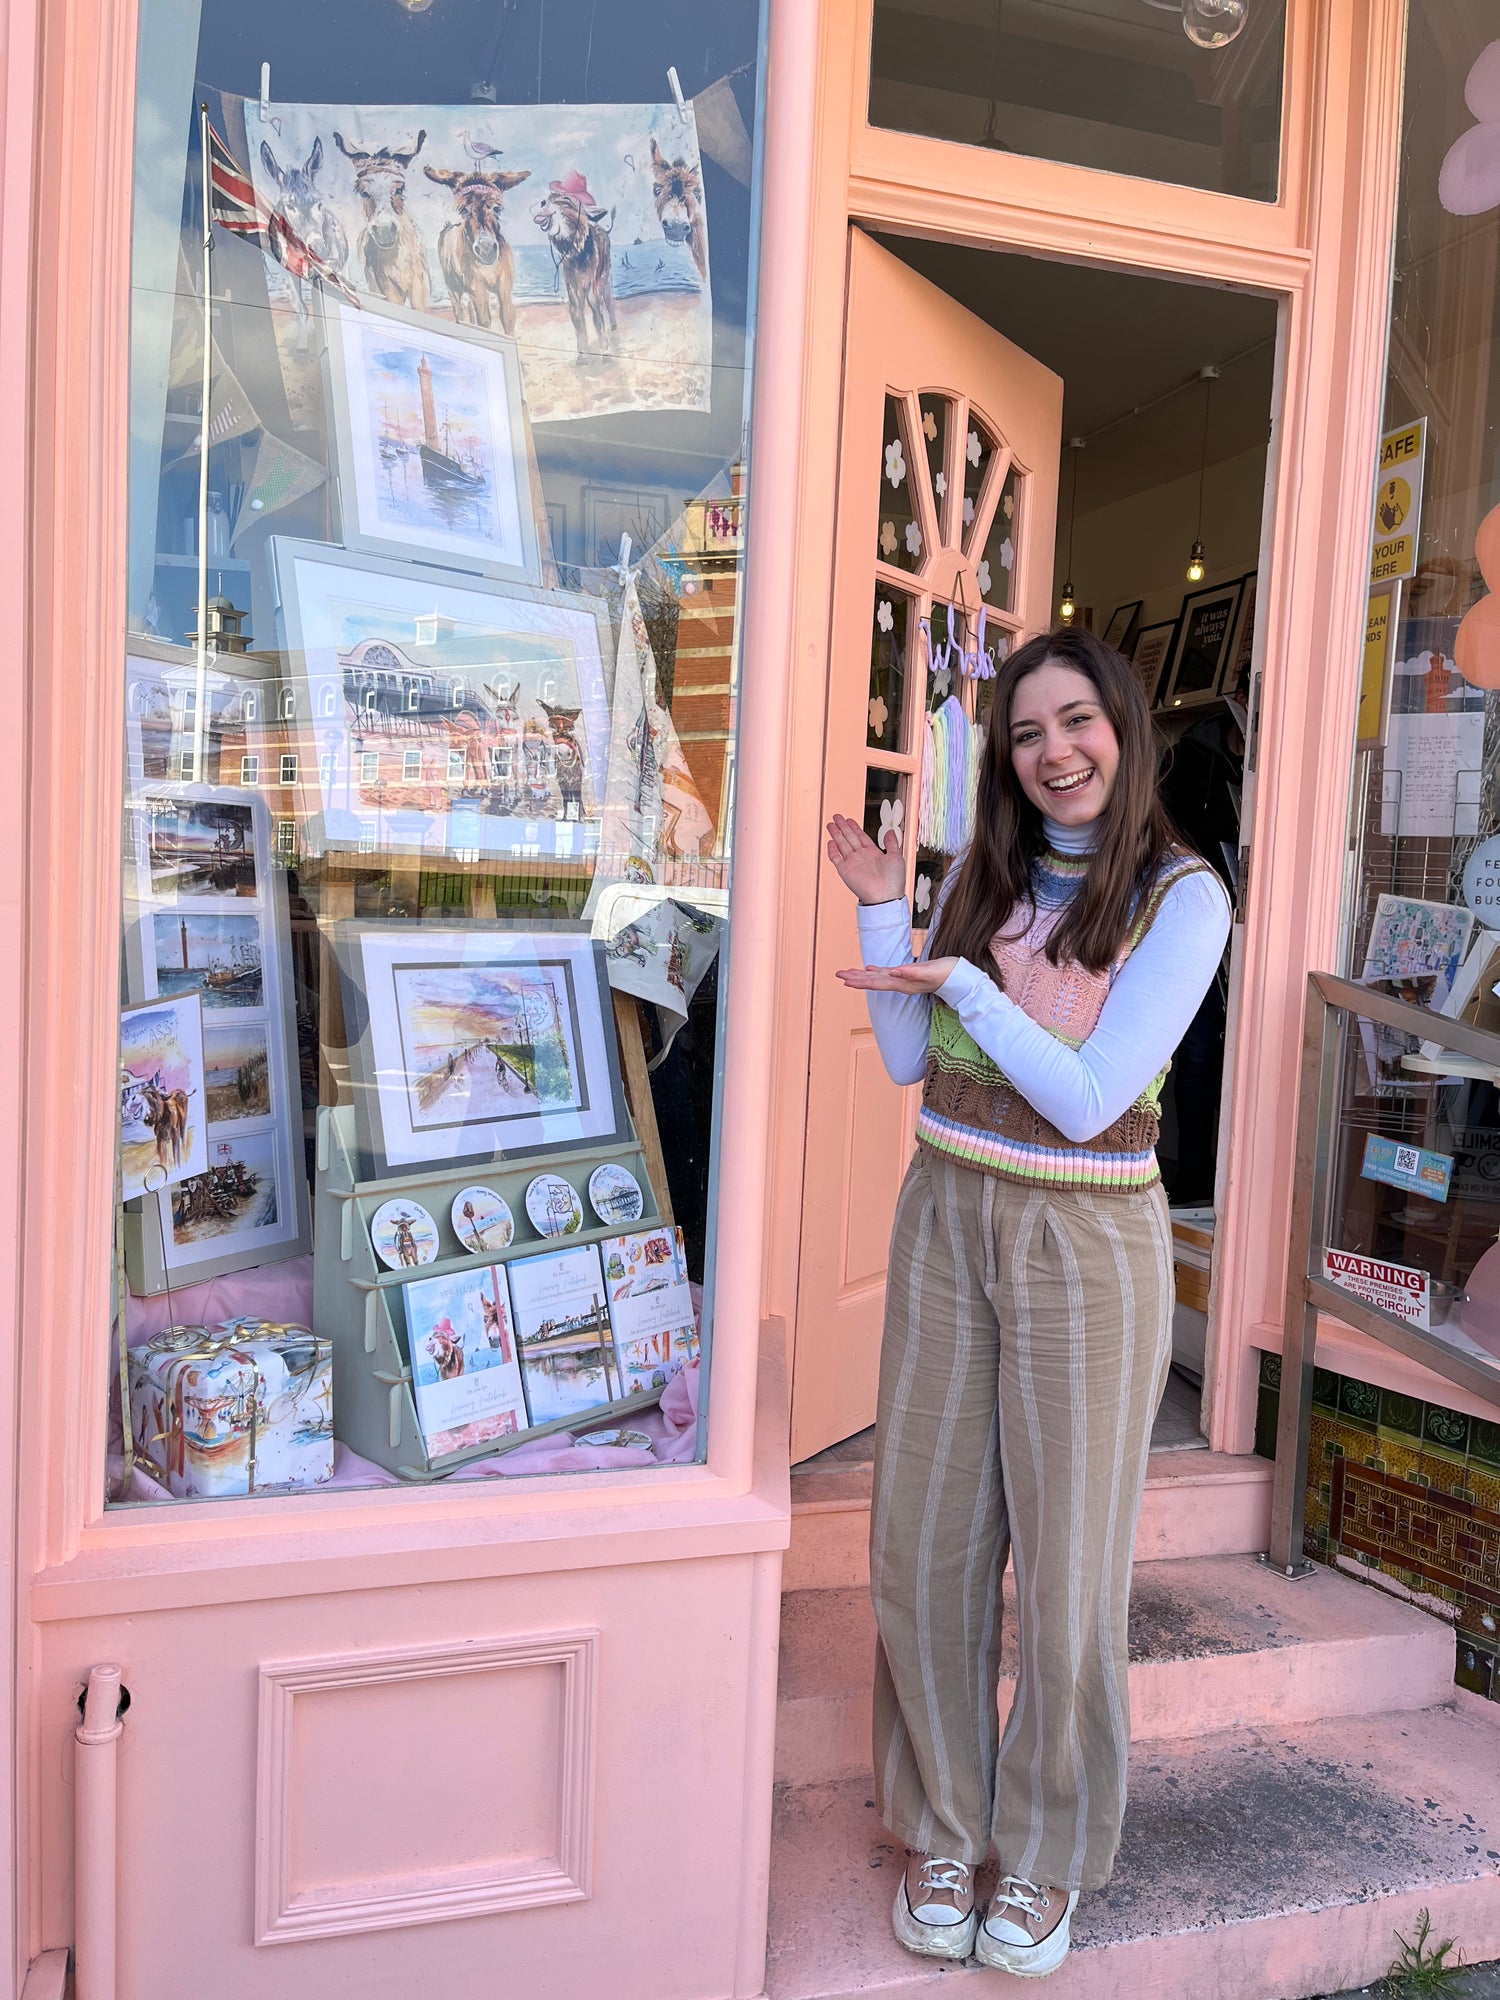 Local artist, Eve Leoni Smith, stood in front of the Original Emporium, Cleethorpes with her art window display.